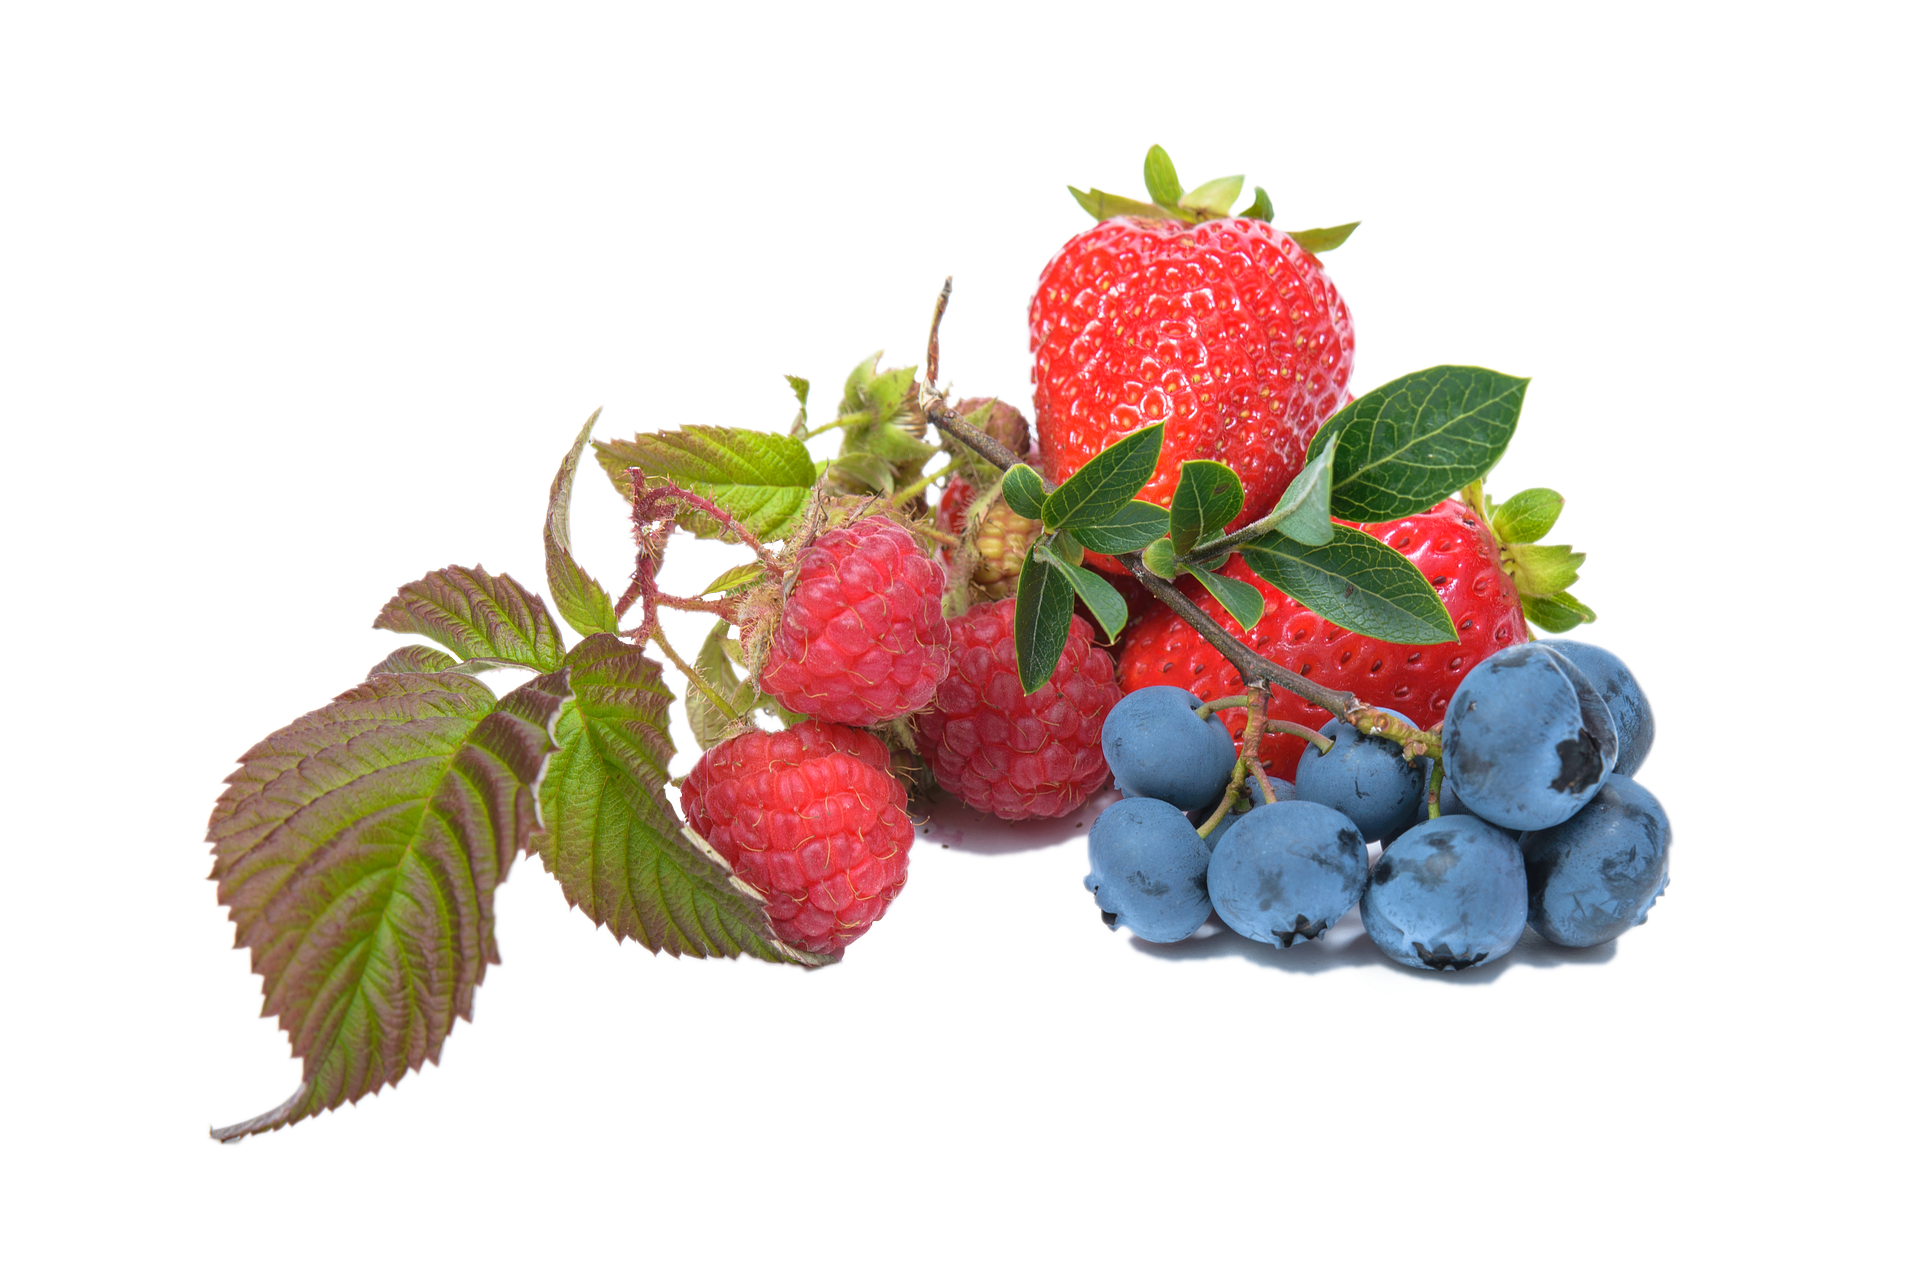 Strawberries and blueberries with stems